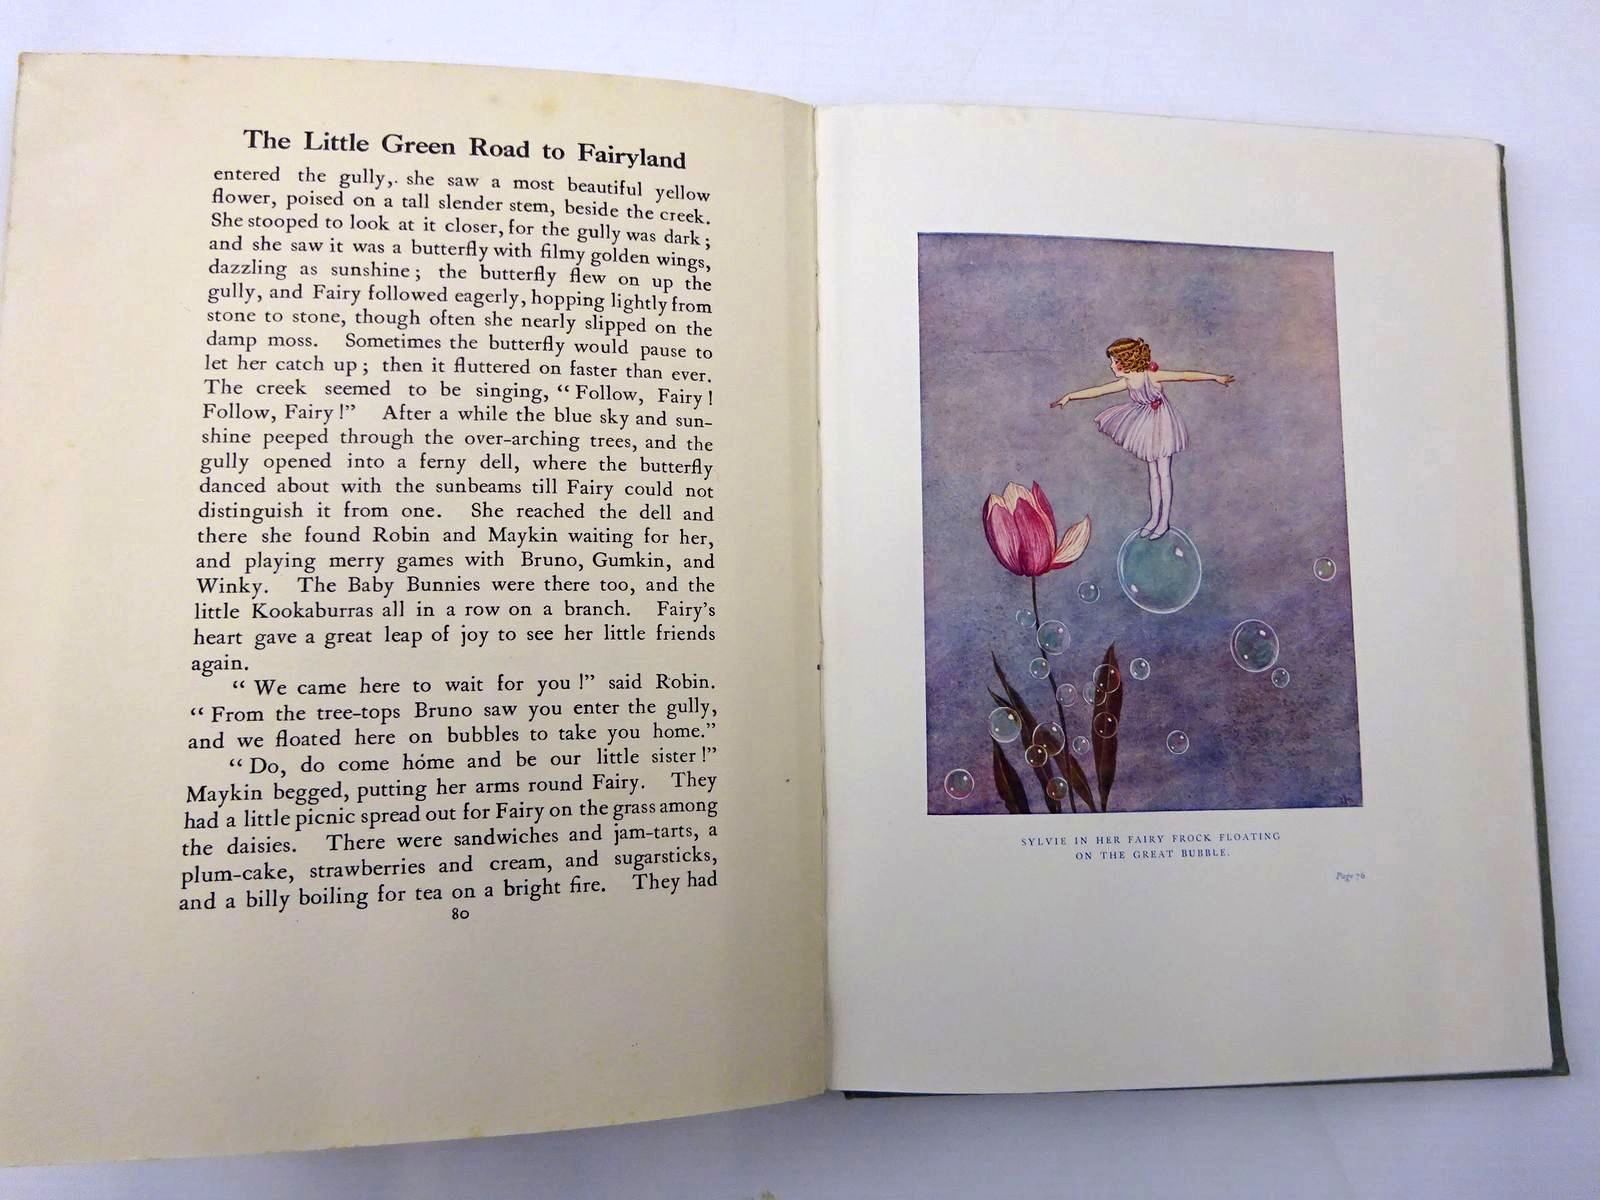 Photo of THE LITTLE GREEN ROAD TO FAIRYLAND written by Rentoul, Annie R. illustrated by Outhwaite, Ida Rentoul published by A. & C. Black Ltd. (STOCK CODE: 2130264)  for sale by Stella & Rose's Books